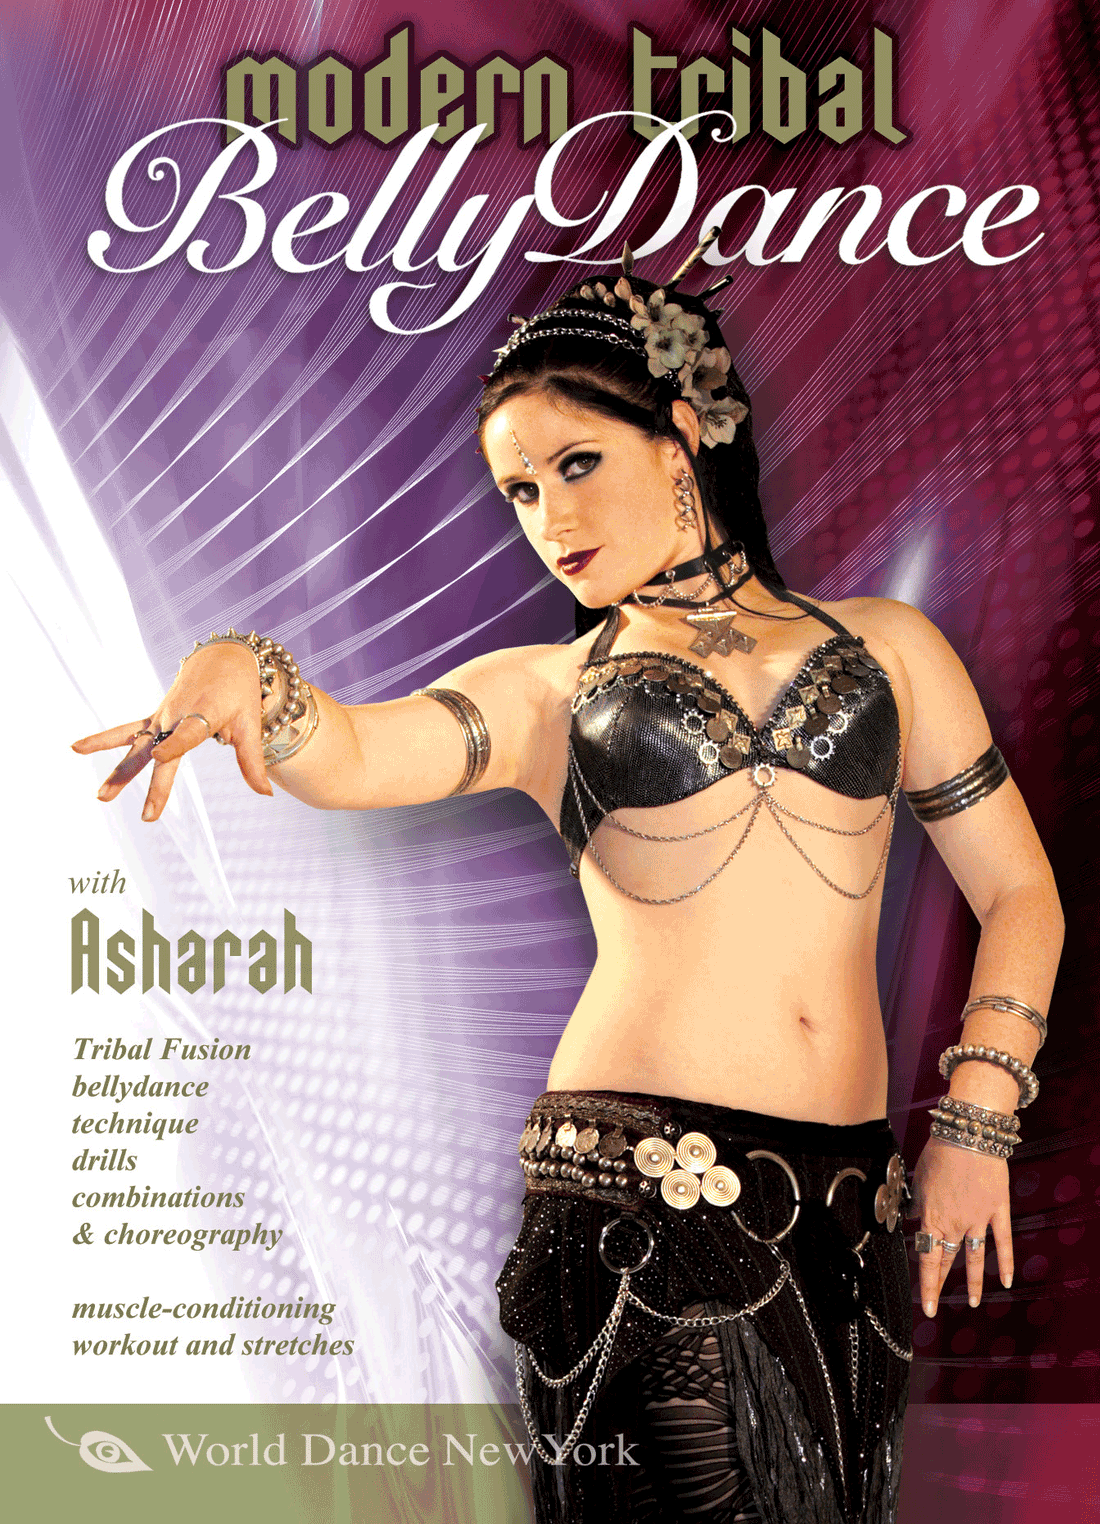 Modern Tribal Belly Dance with Asharah - Tribal Fusion - DVD / streaming video - World Dance New York